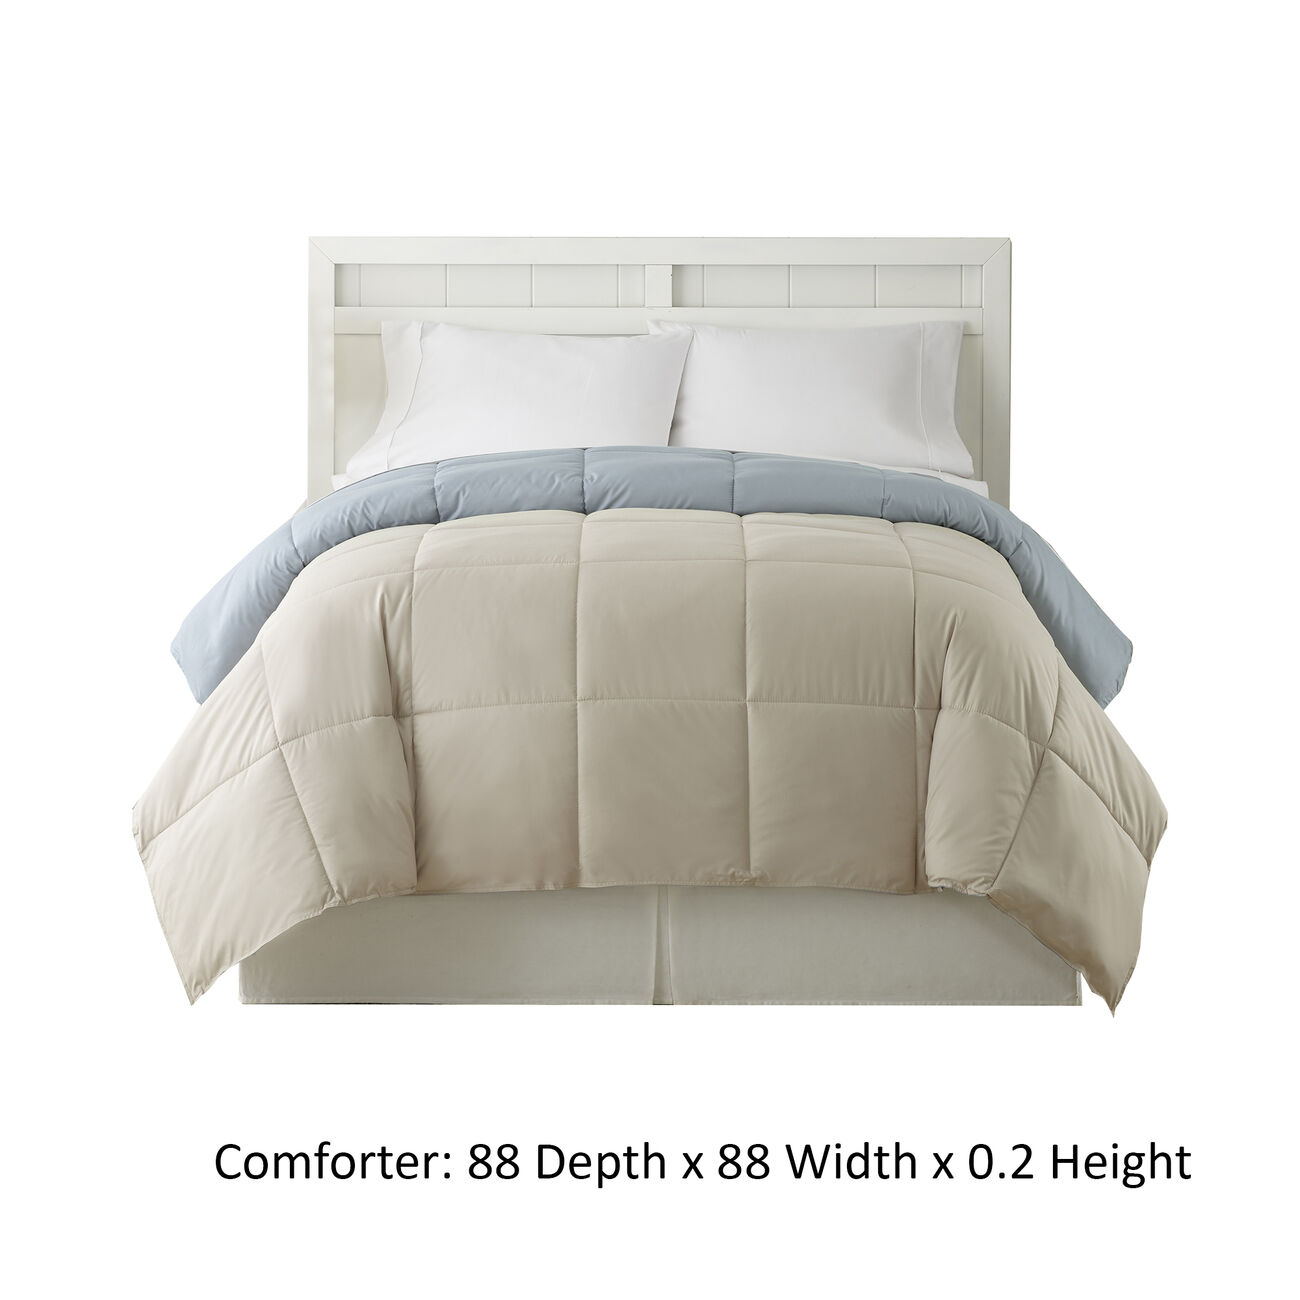 Genoa Queen Size Box Quilted Reversible Comforter The Urban Port, Gray and Blue